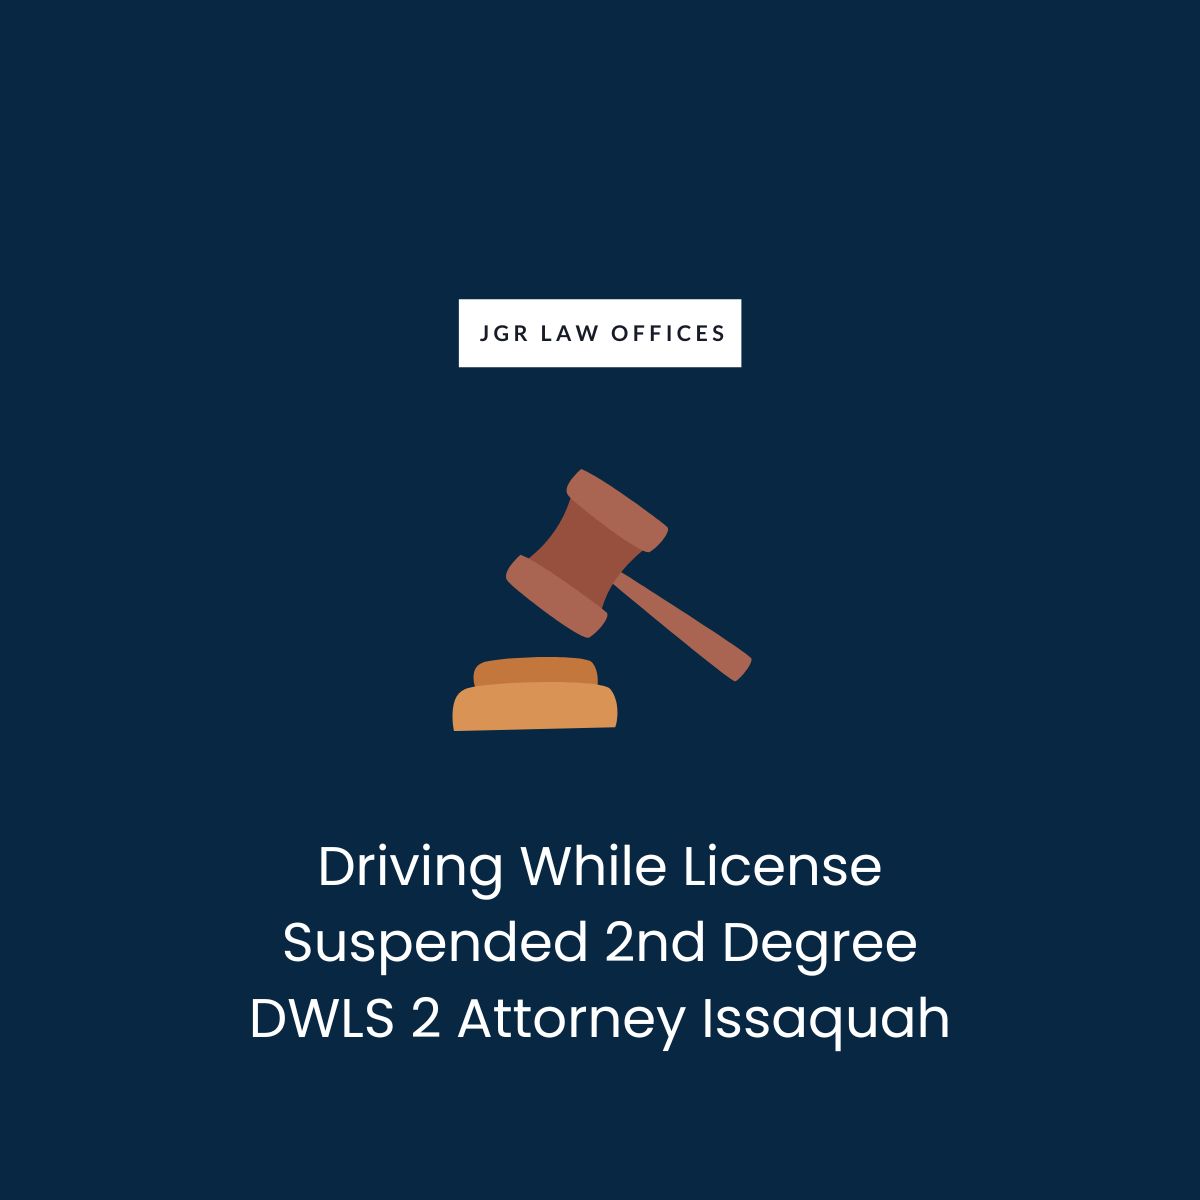 Driving While License Suspended 2nd Degree DWLS 2 Attorney Issaquah